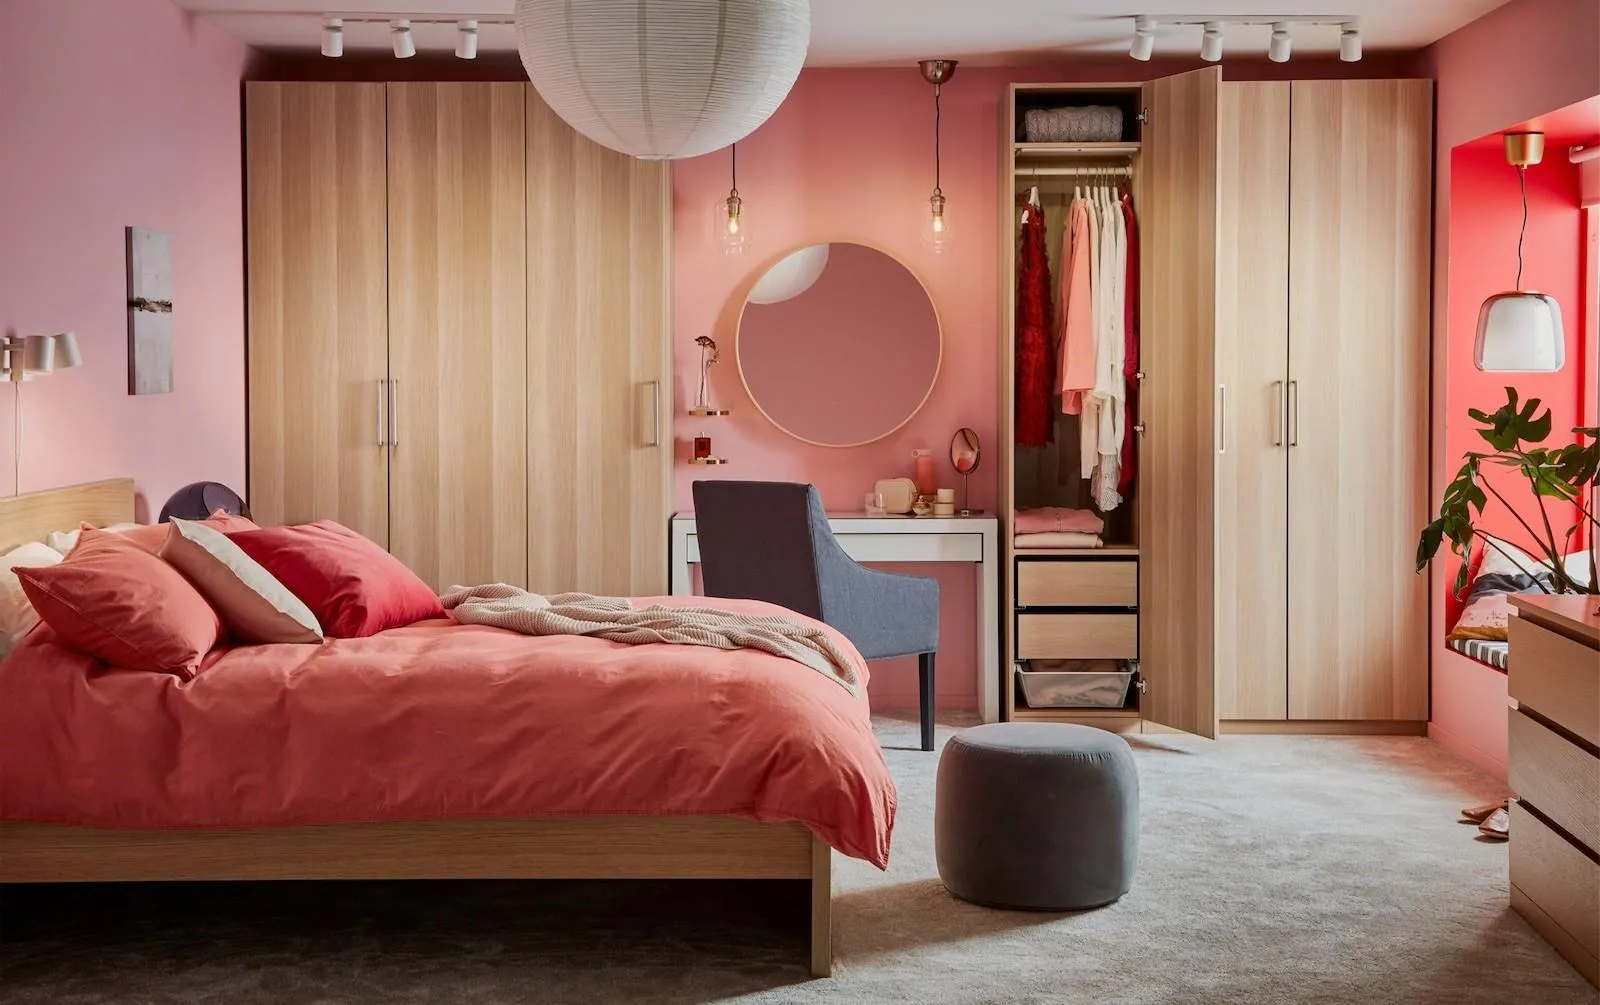 pink bedroom with bed, table, grey rug, white pendant light, round mirror, closet, table and chair